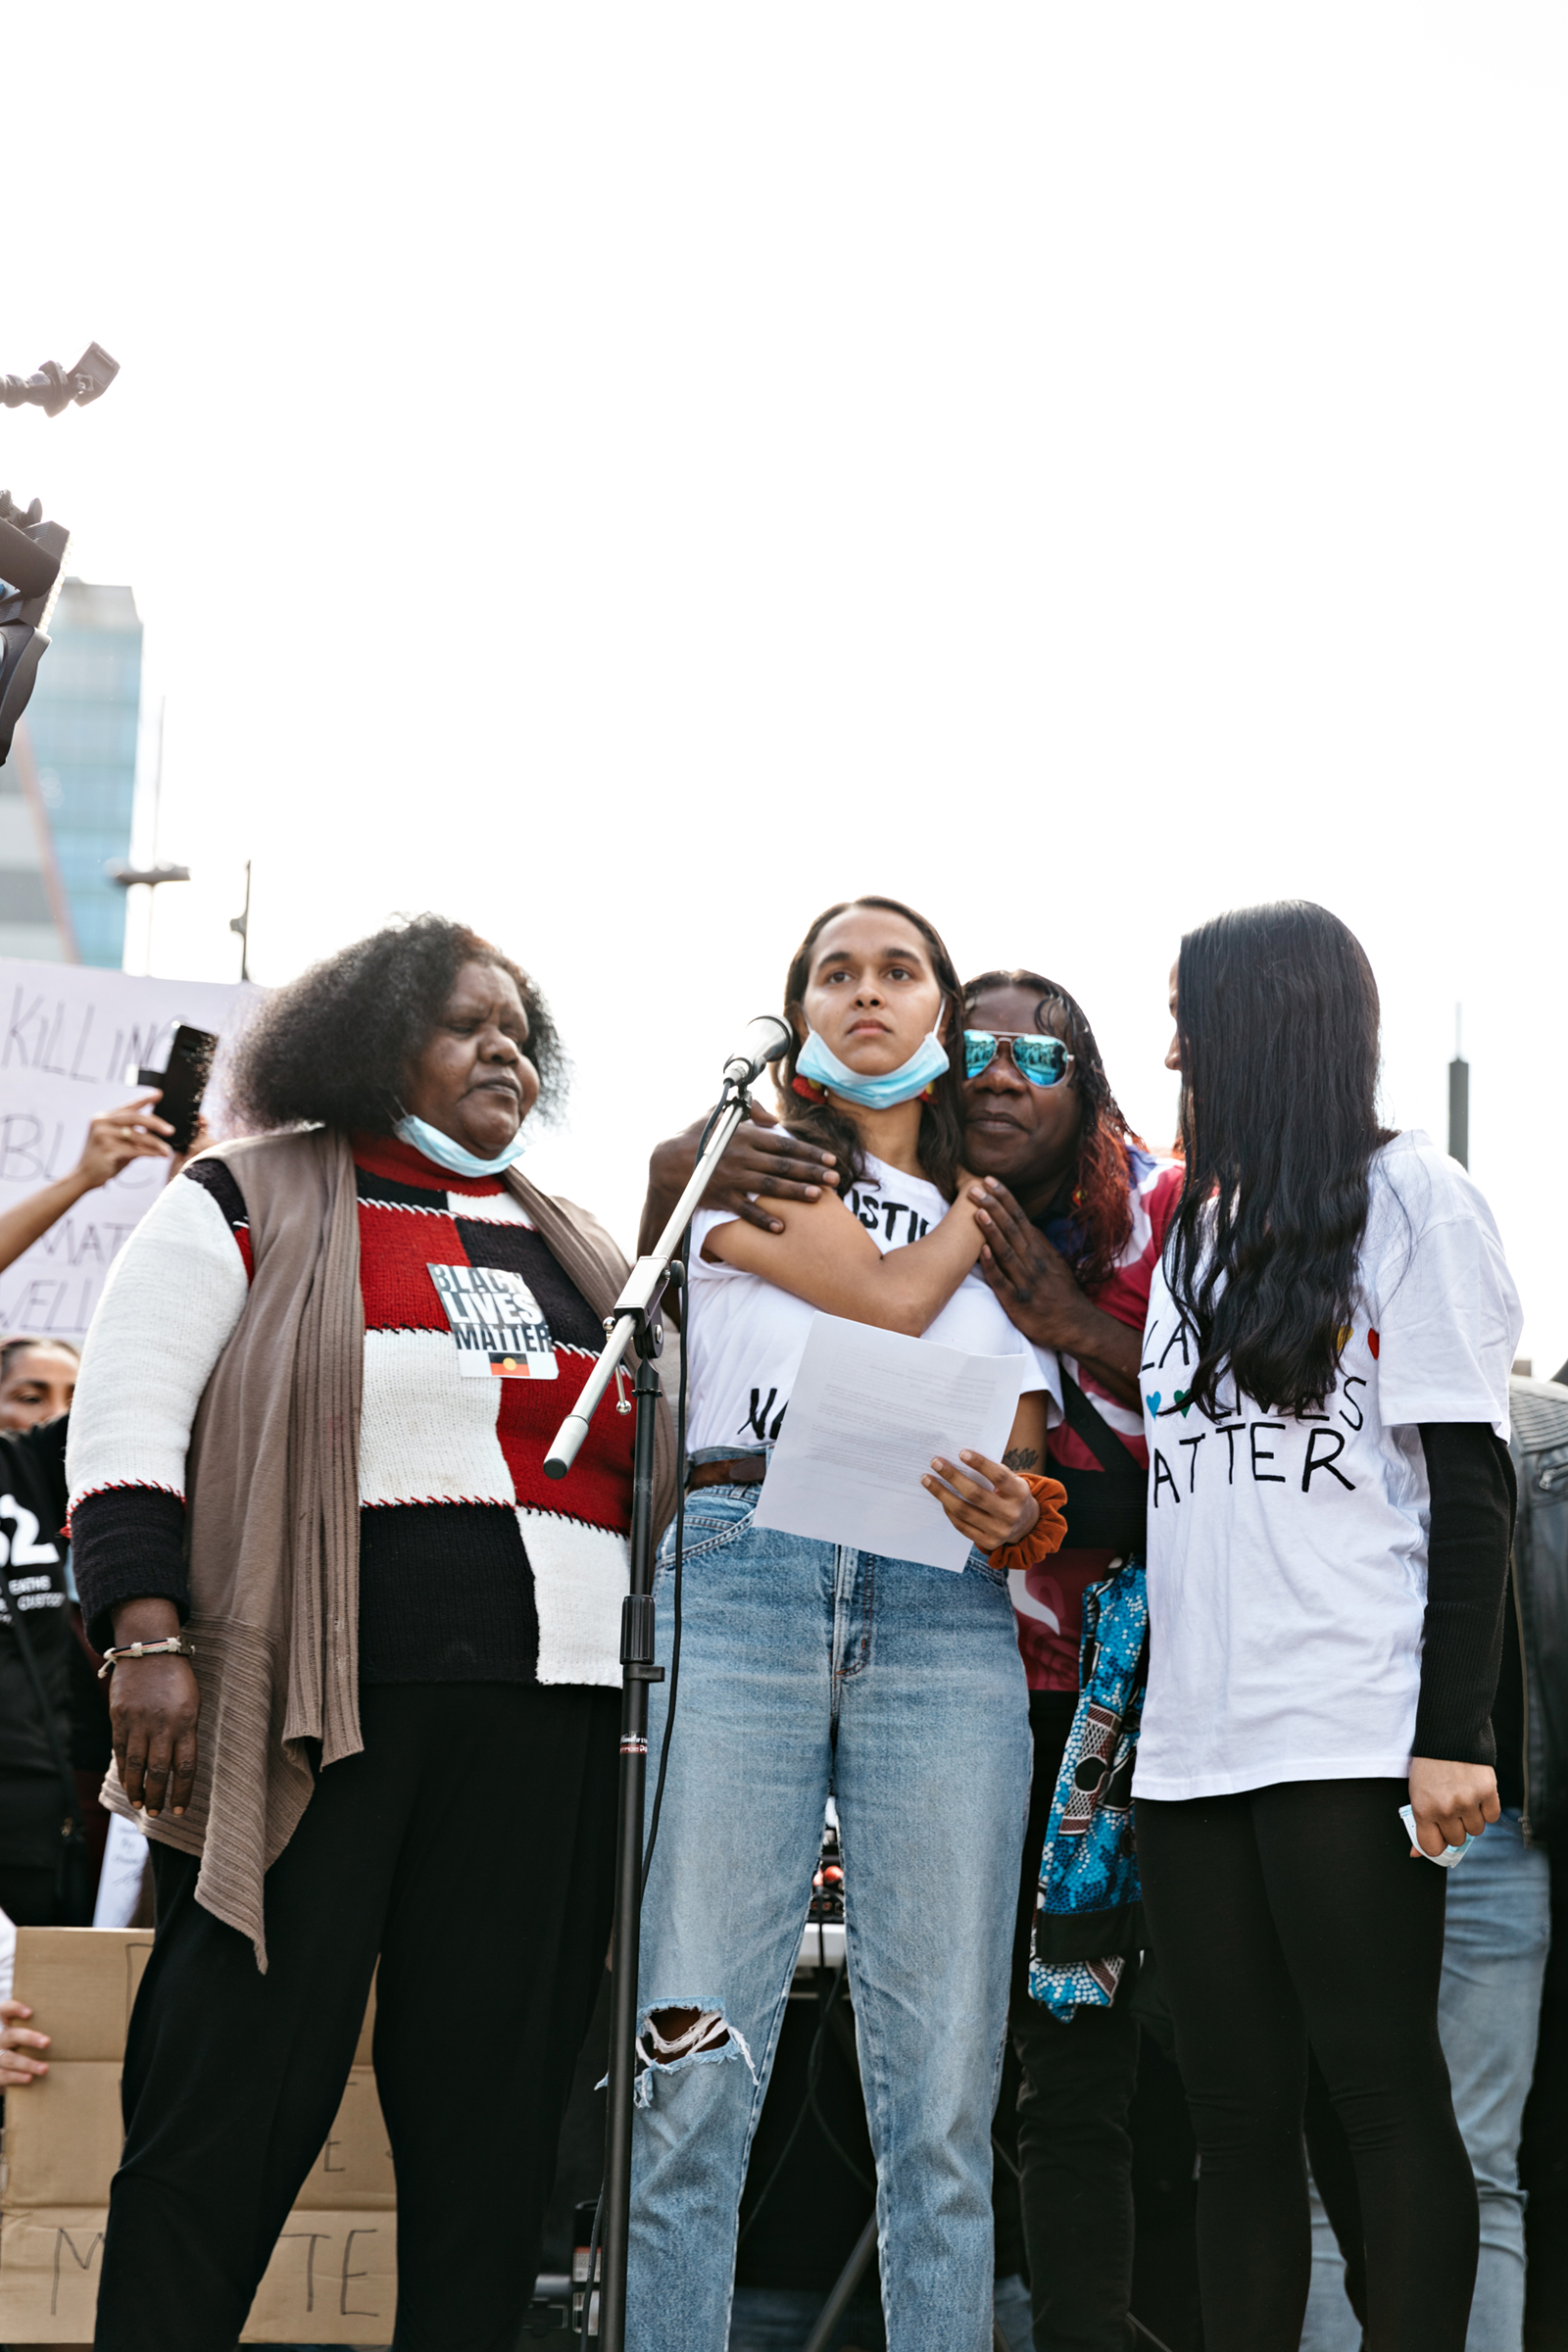 Samara Fernandez-Brown and family members at a Black Lives Matter protest in Adelaide, Australia on June 6, 2020. (Sia Duff)